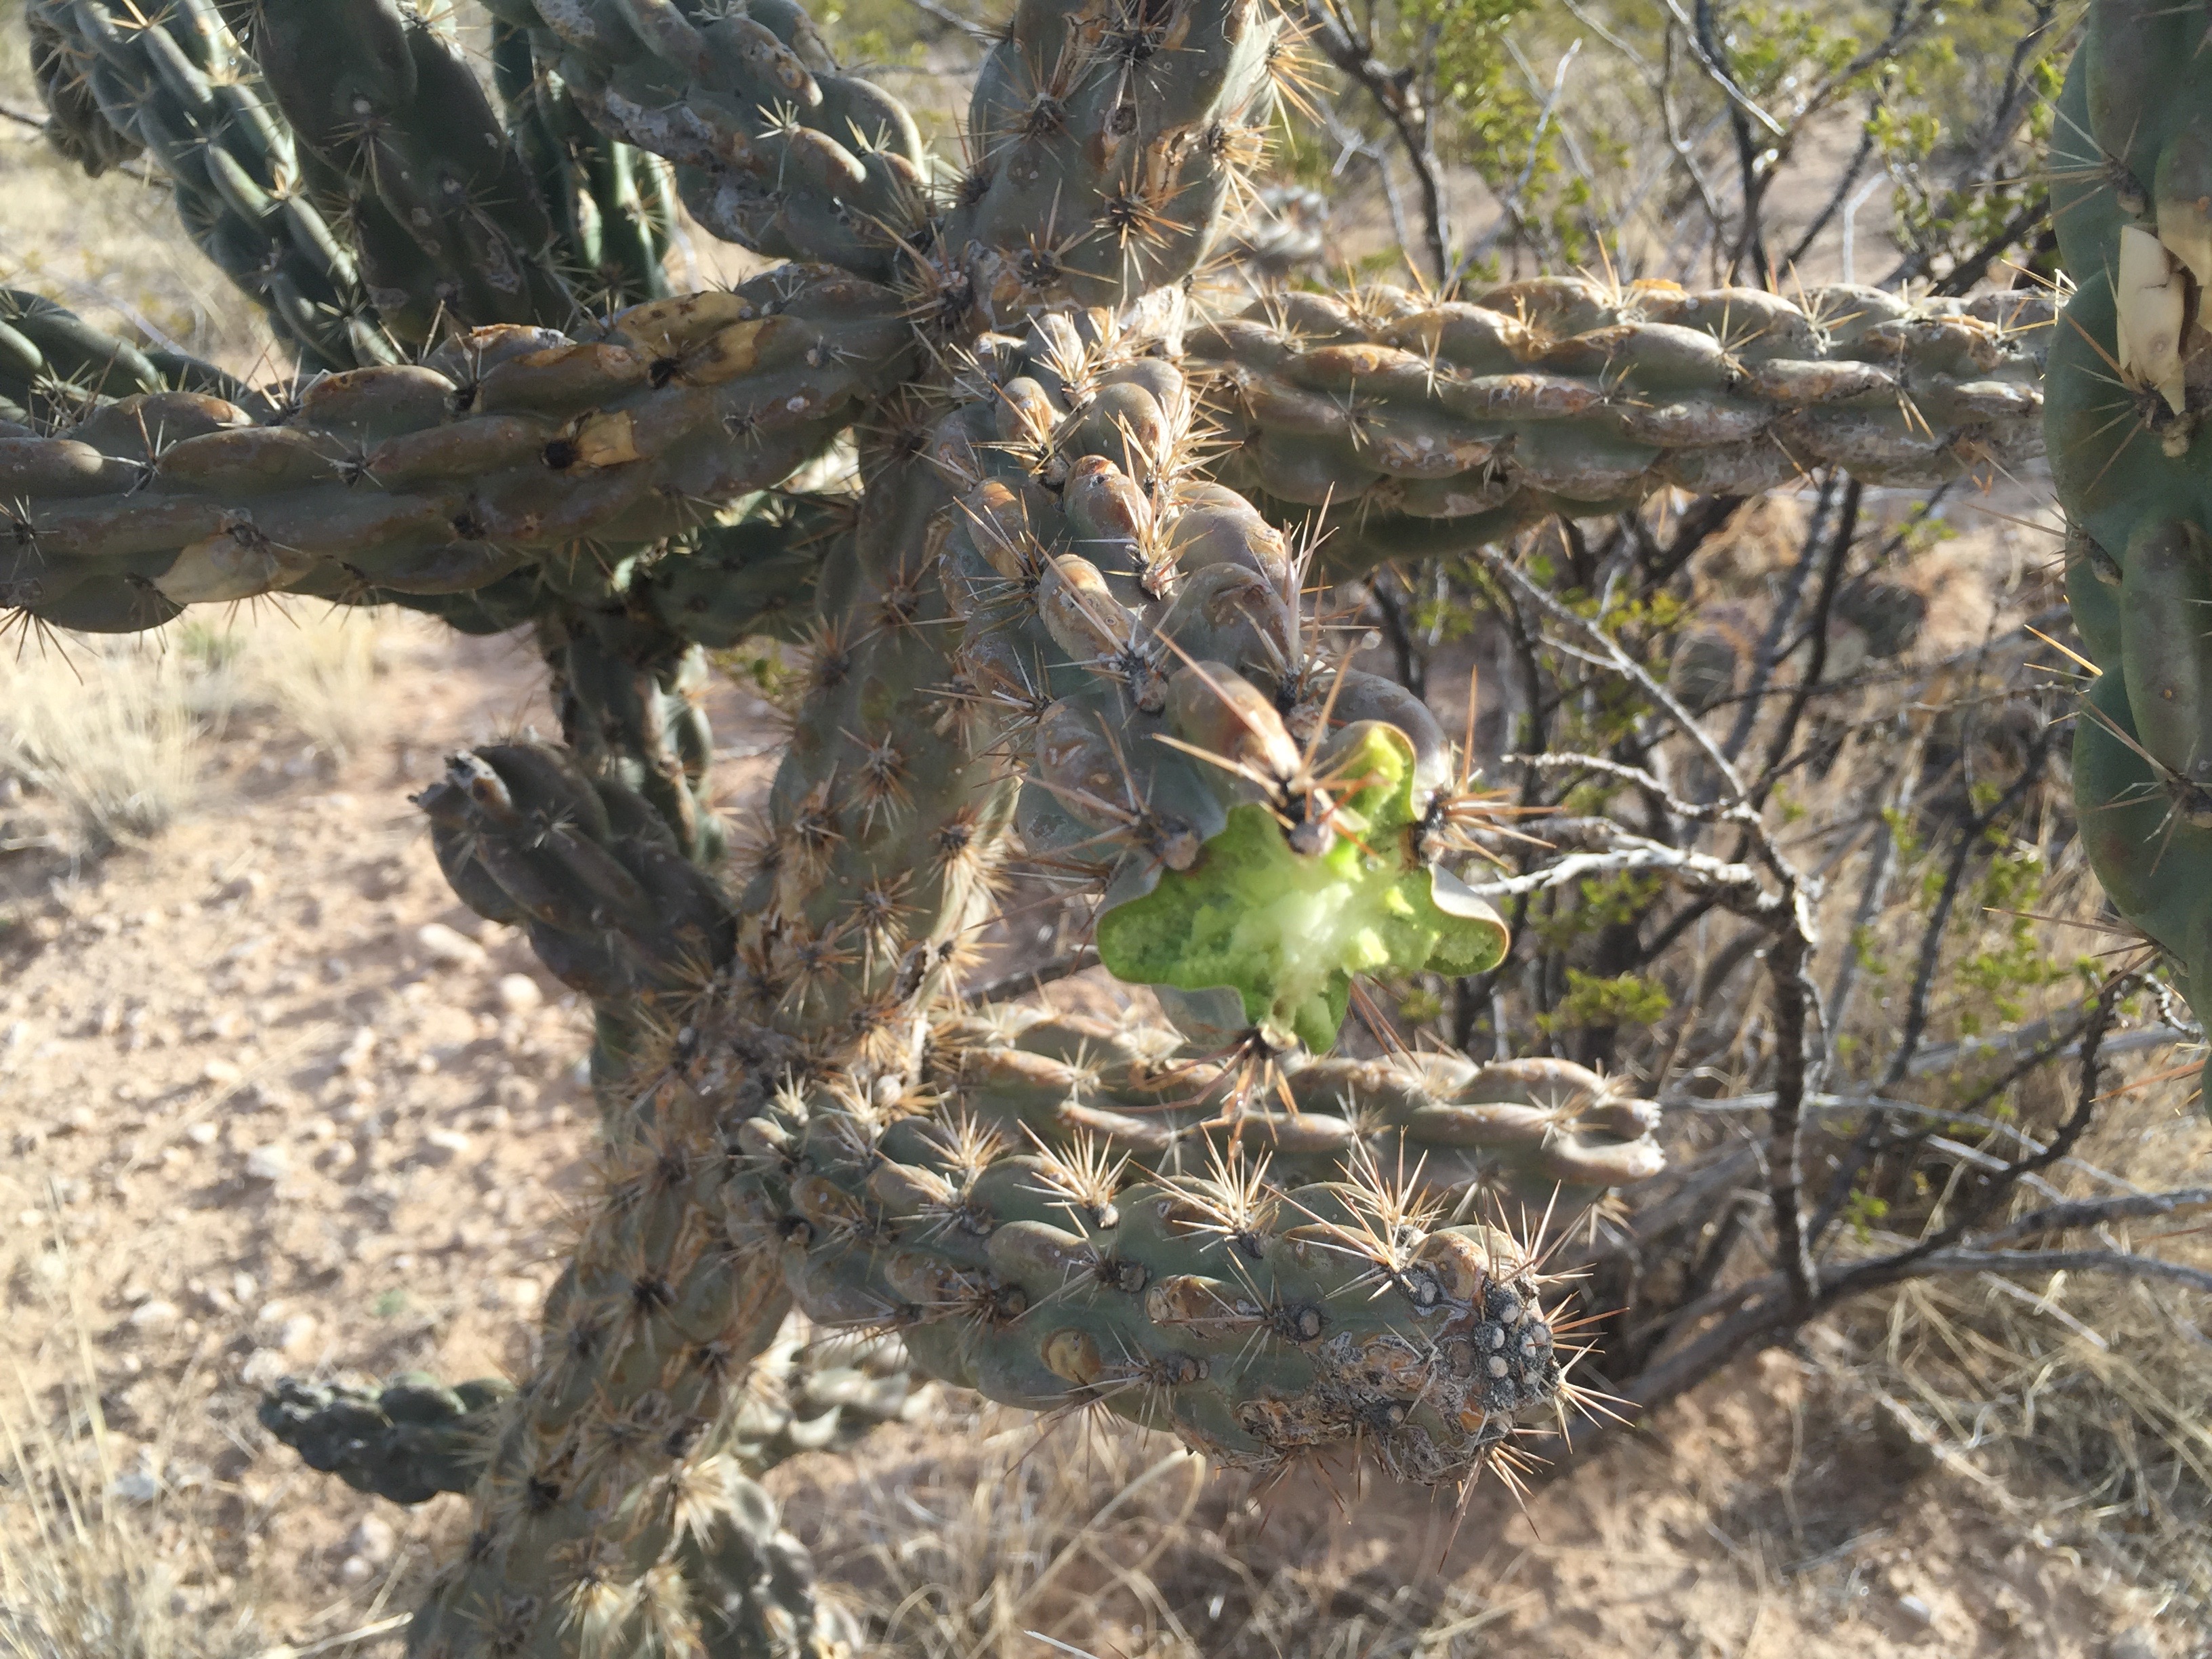 Cutaway of a cholla branch showing succulent interior